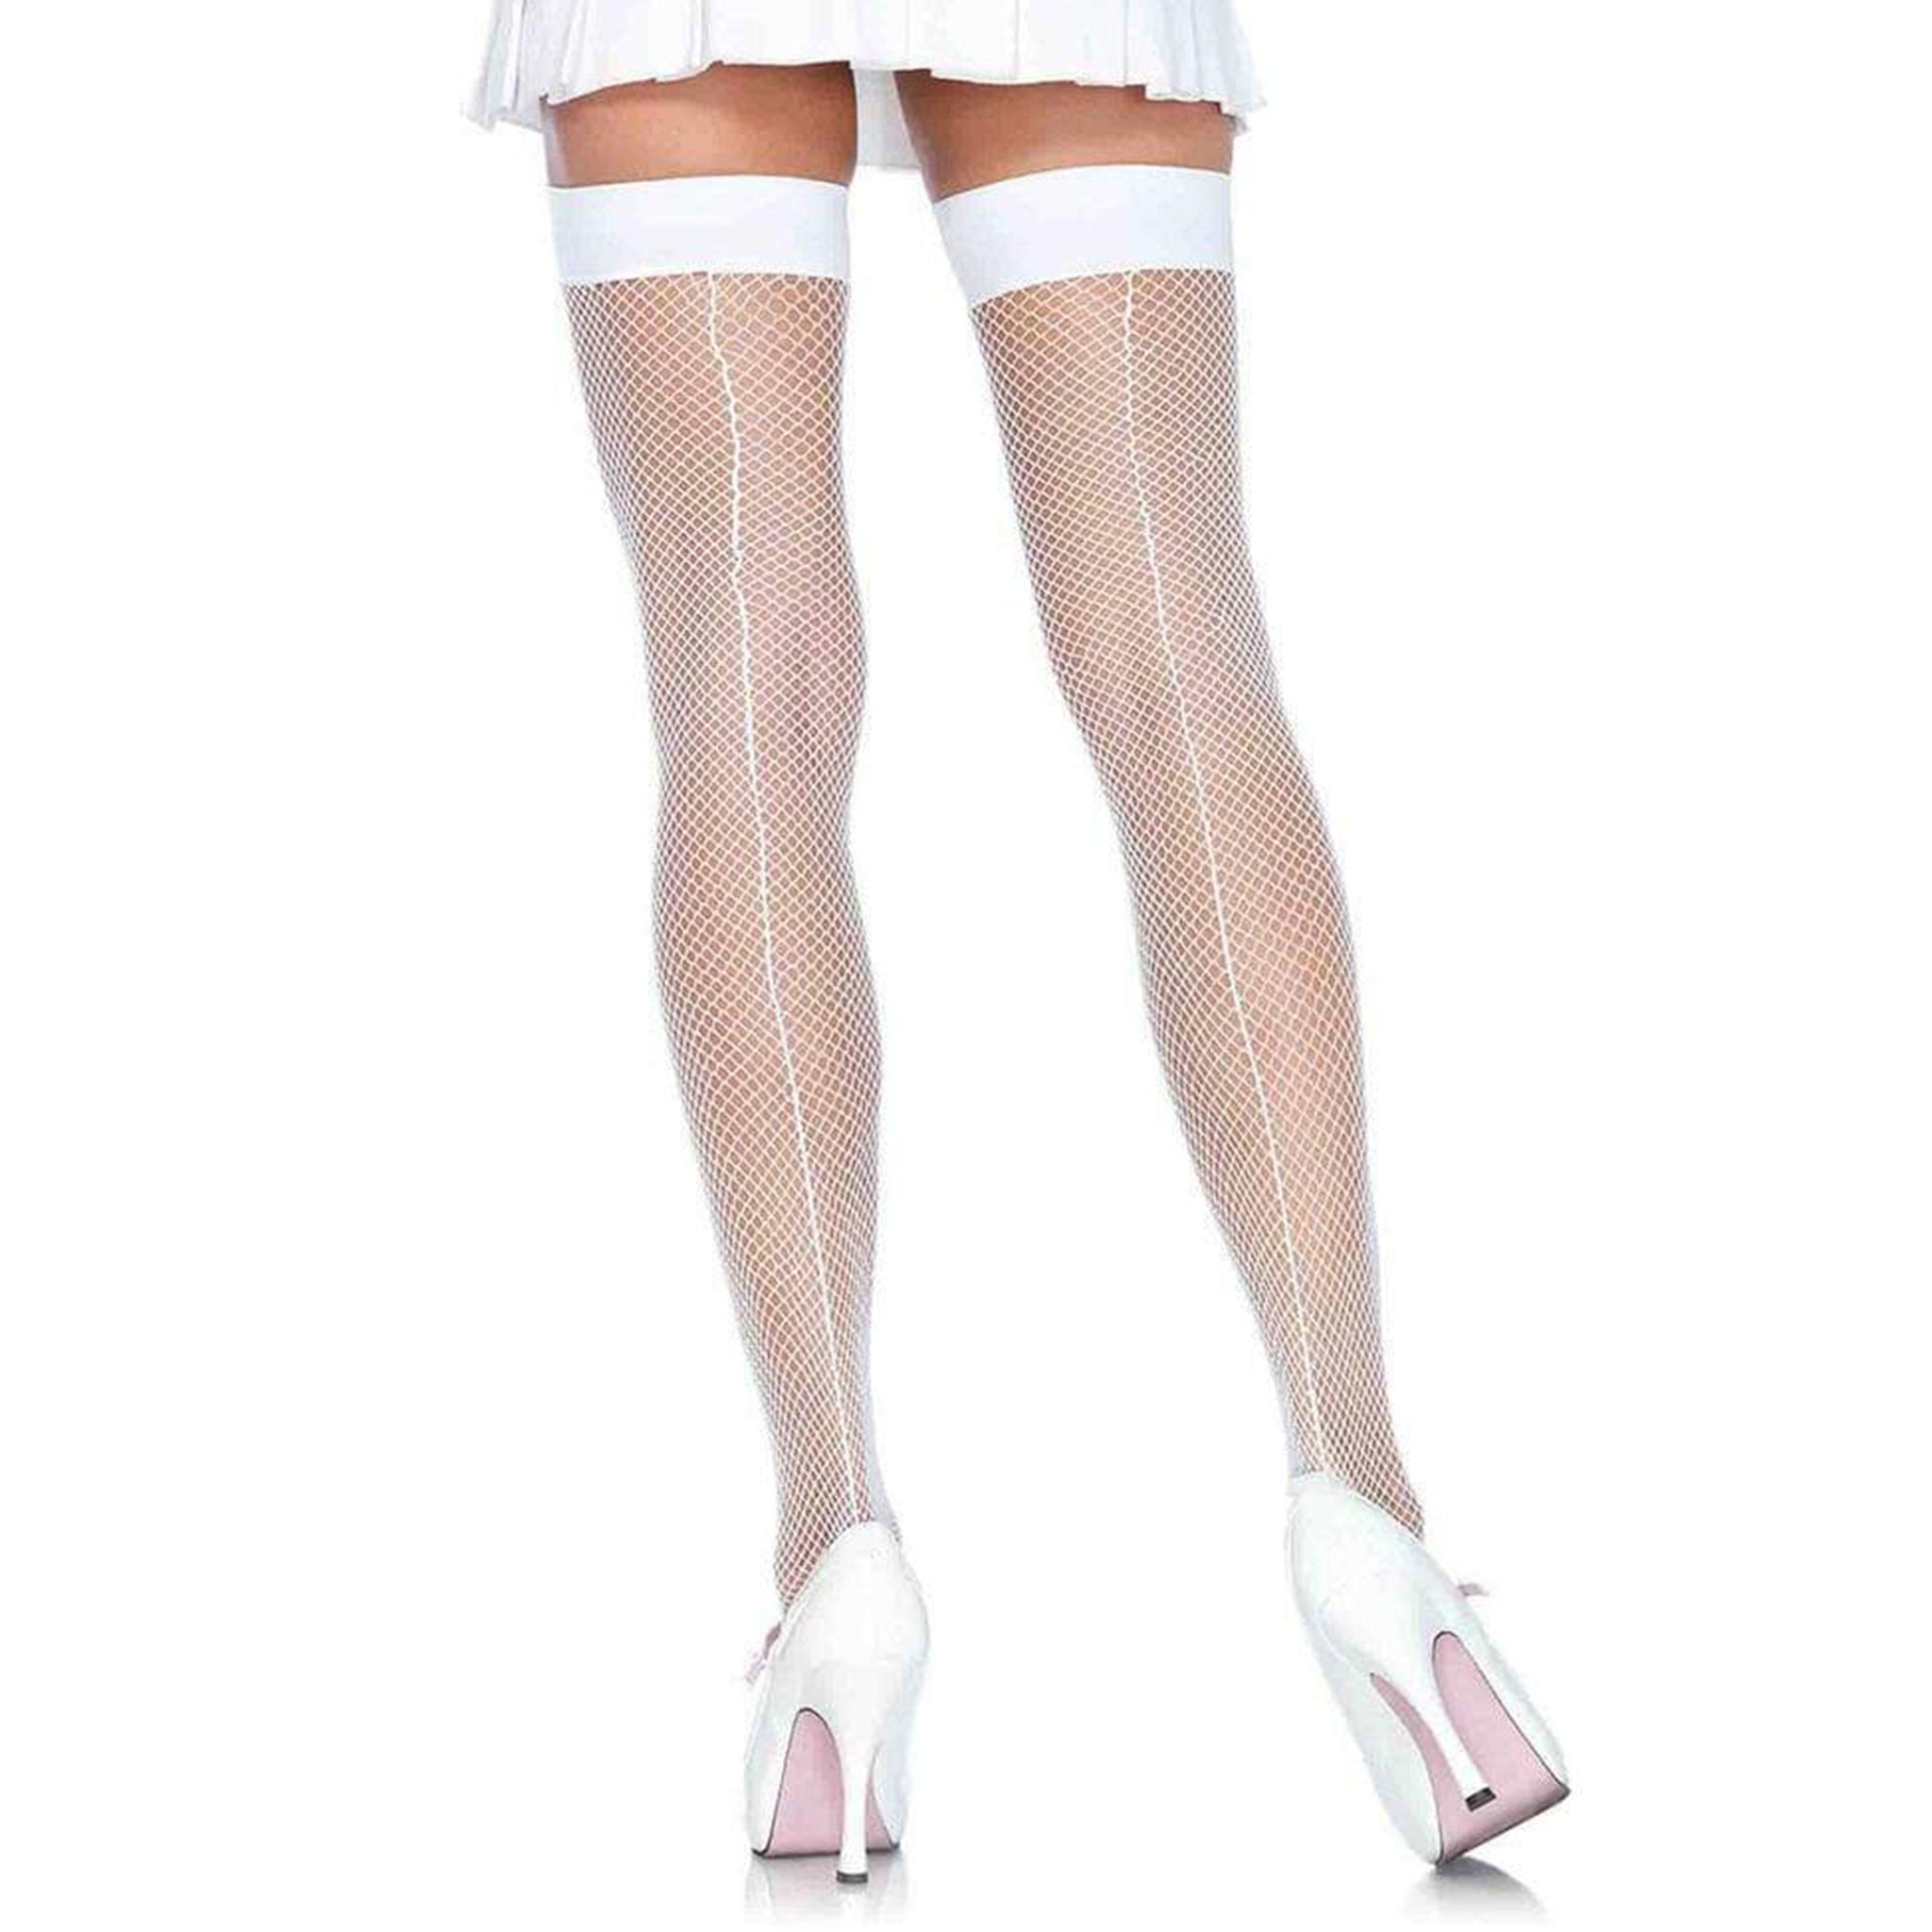 Fishnet Stockings with Back Seam